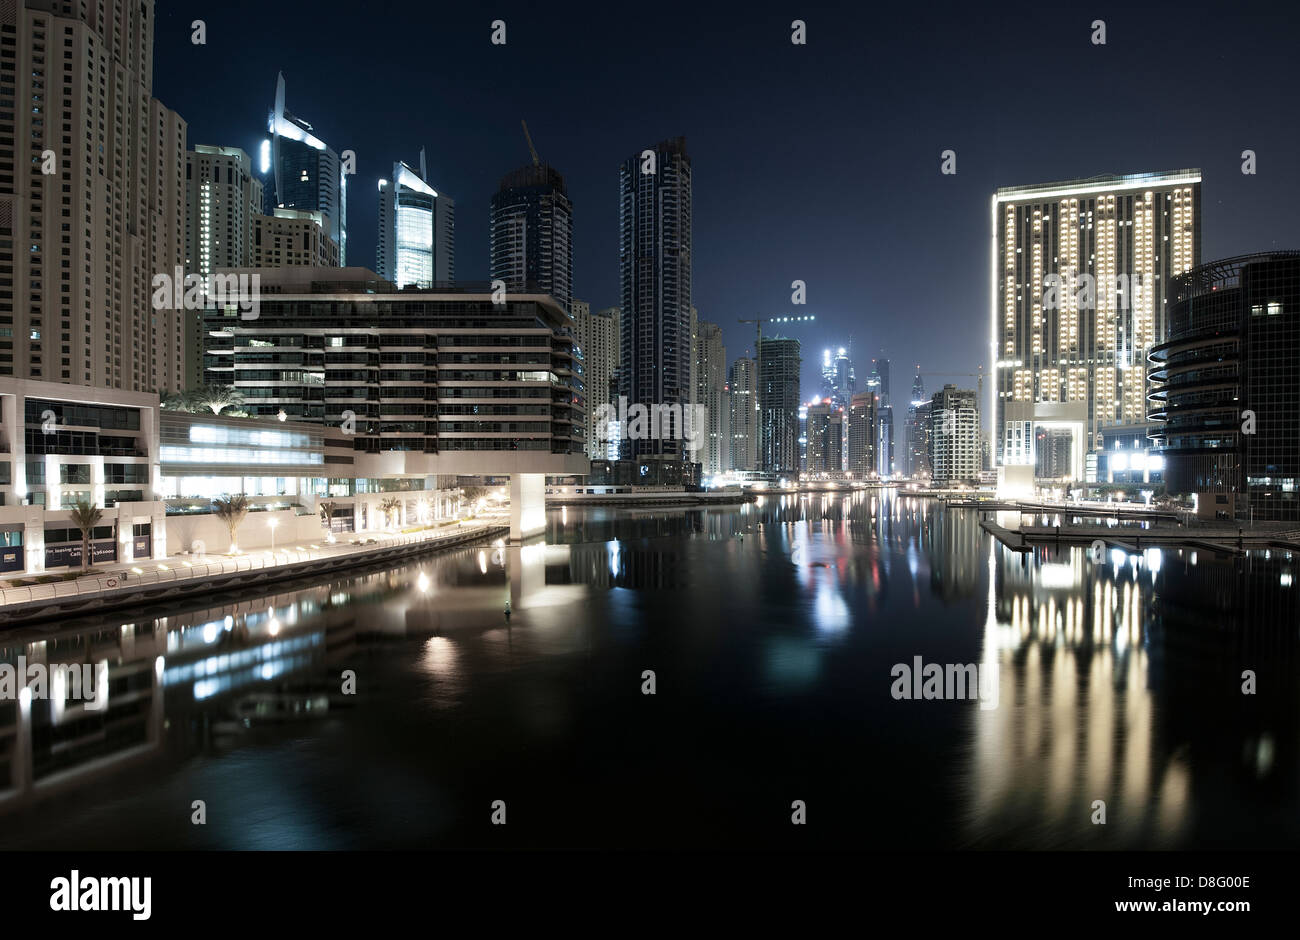 Skyscrapers in Dubai Marina and The Address hotel at night with reflections, New Dubai, UAE Stock Photo